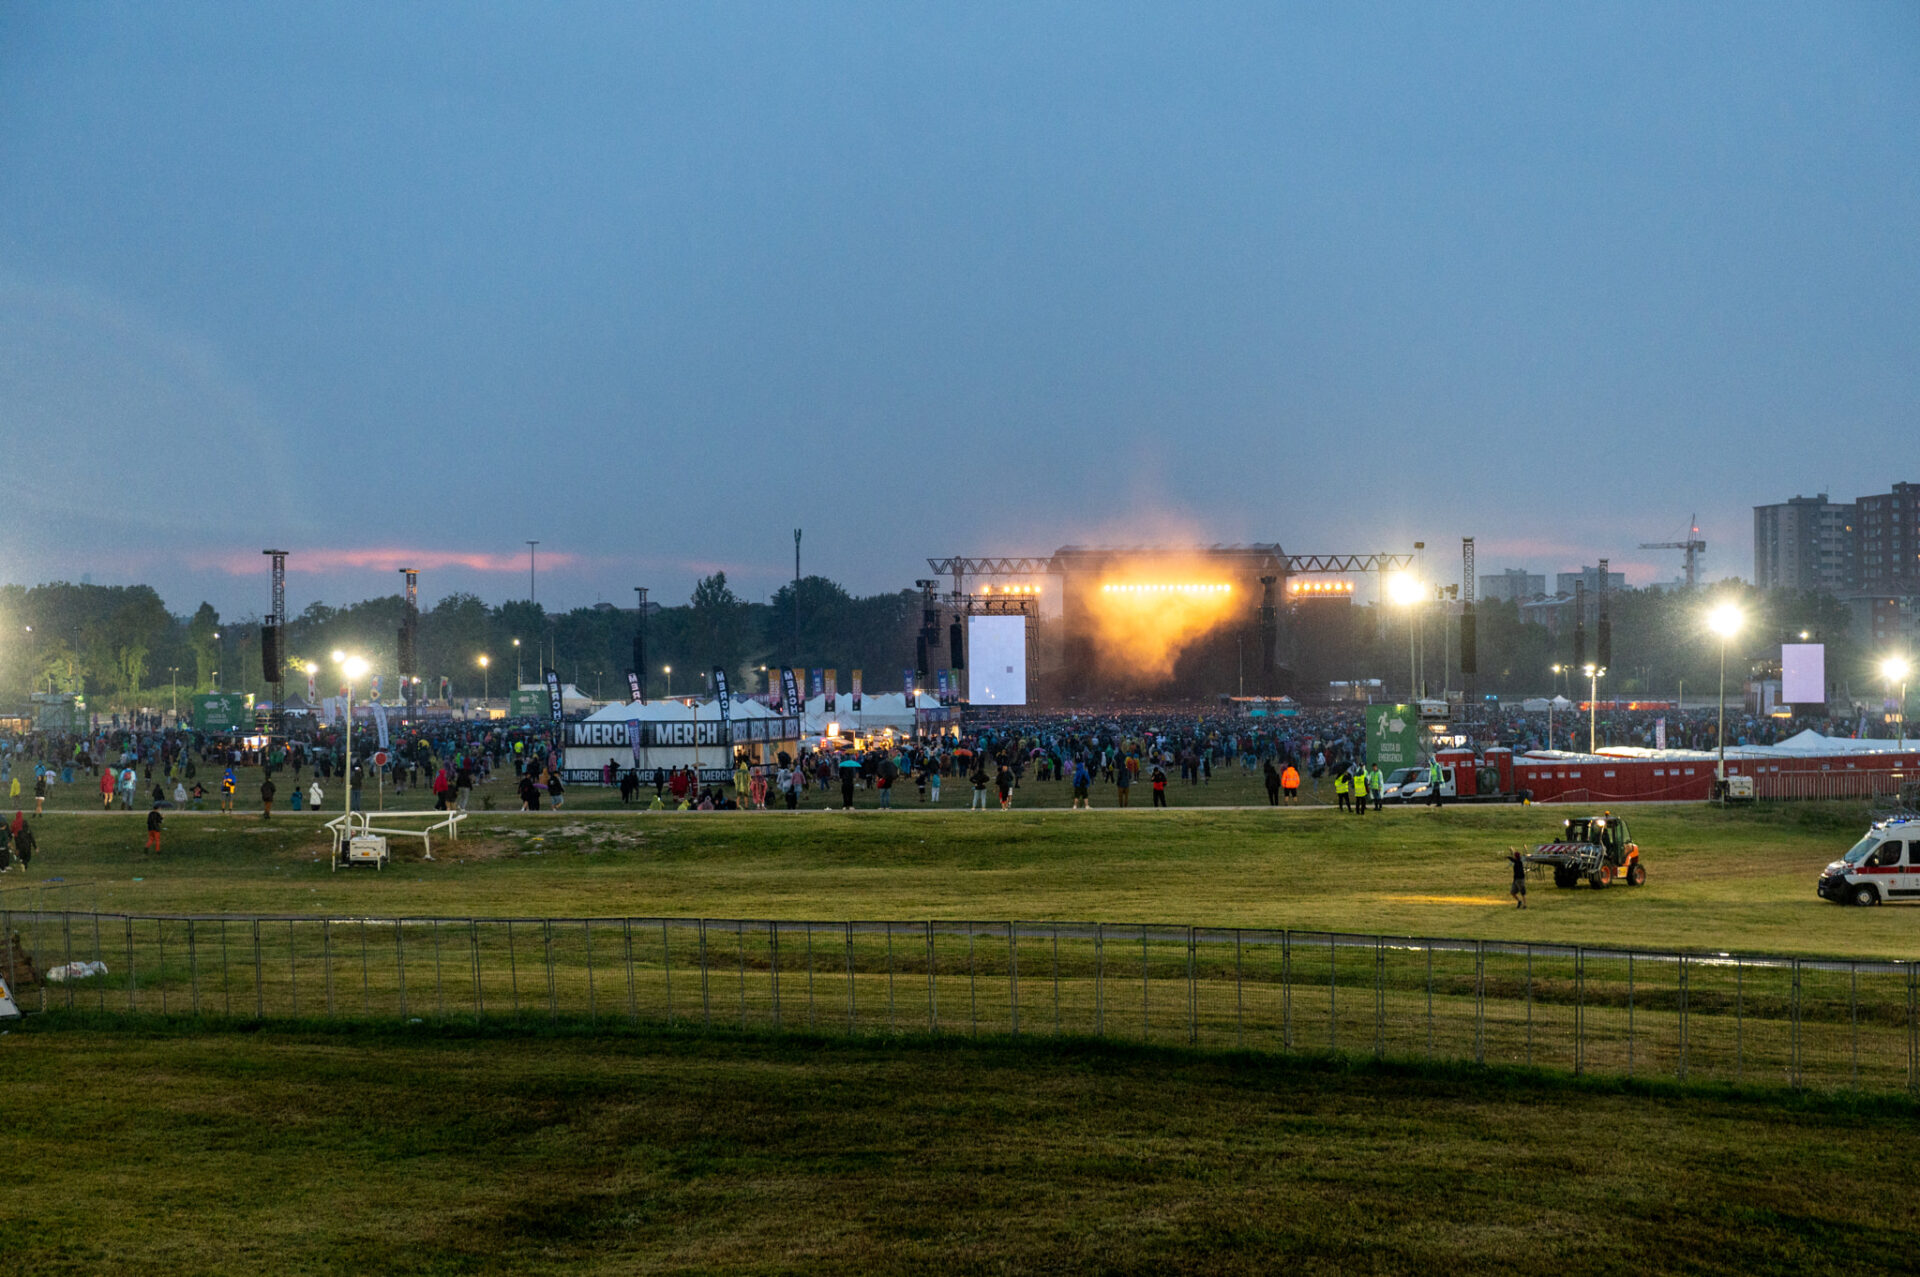 a large field with a crowd of people in it